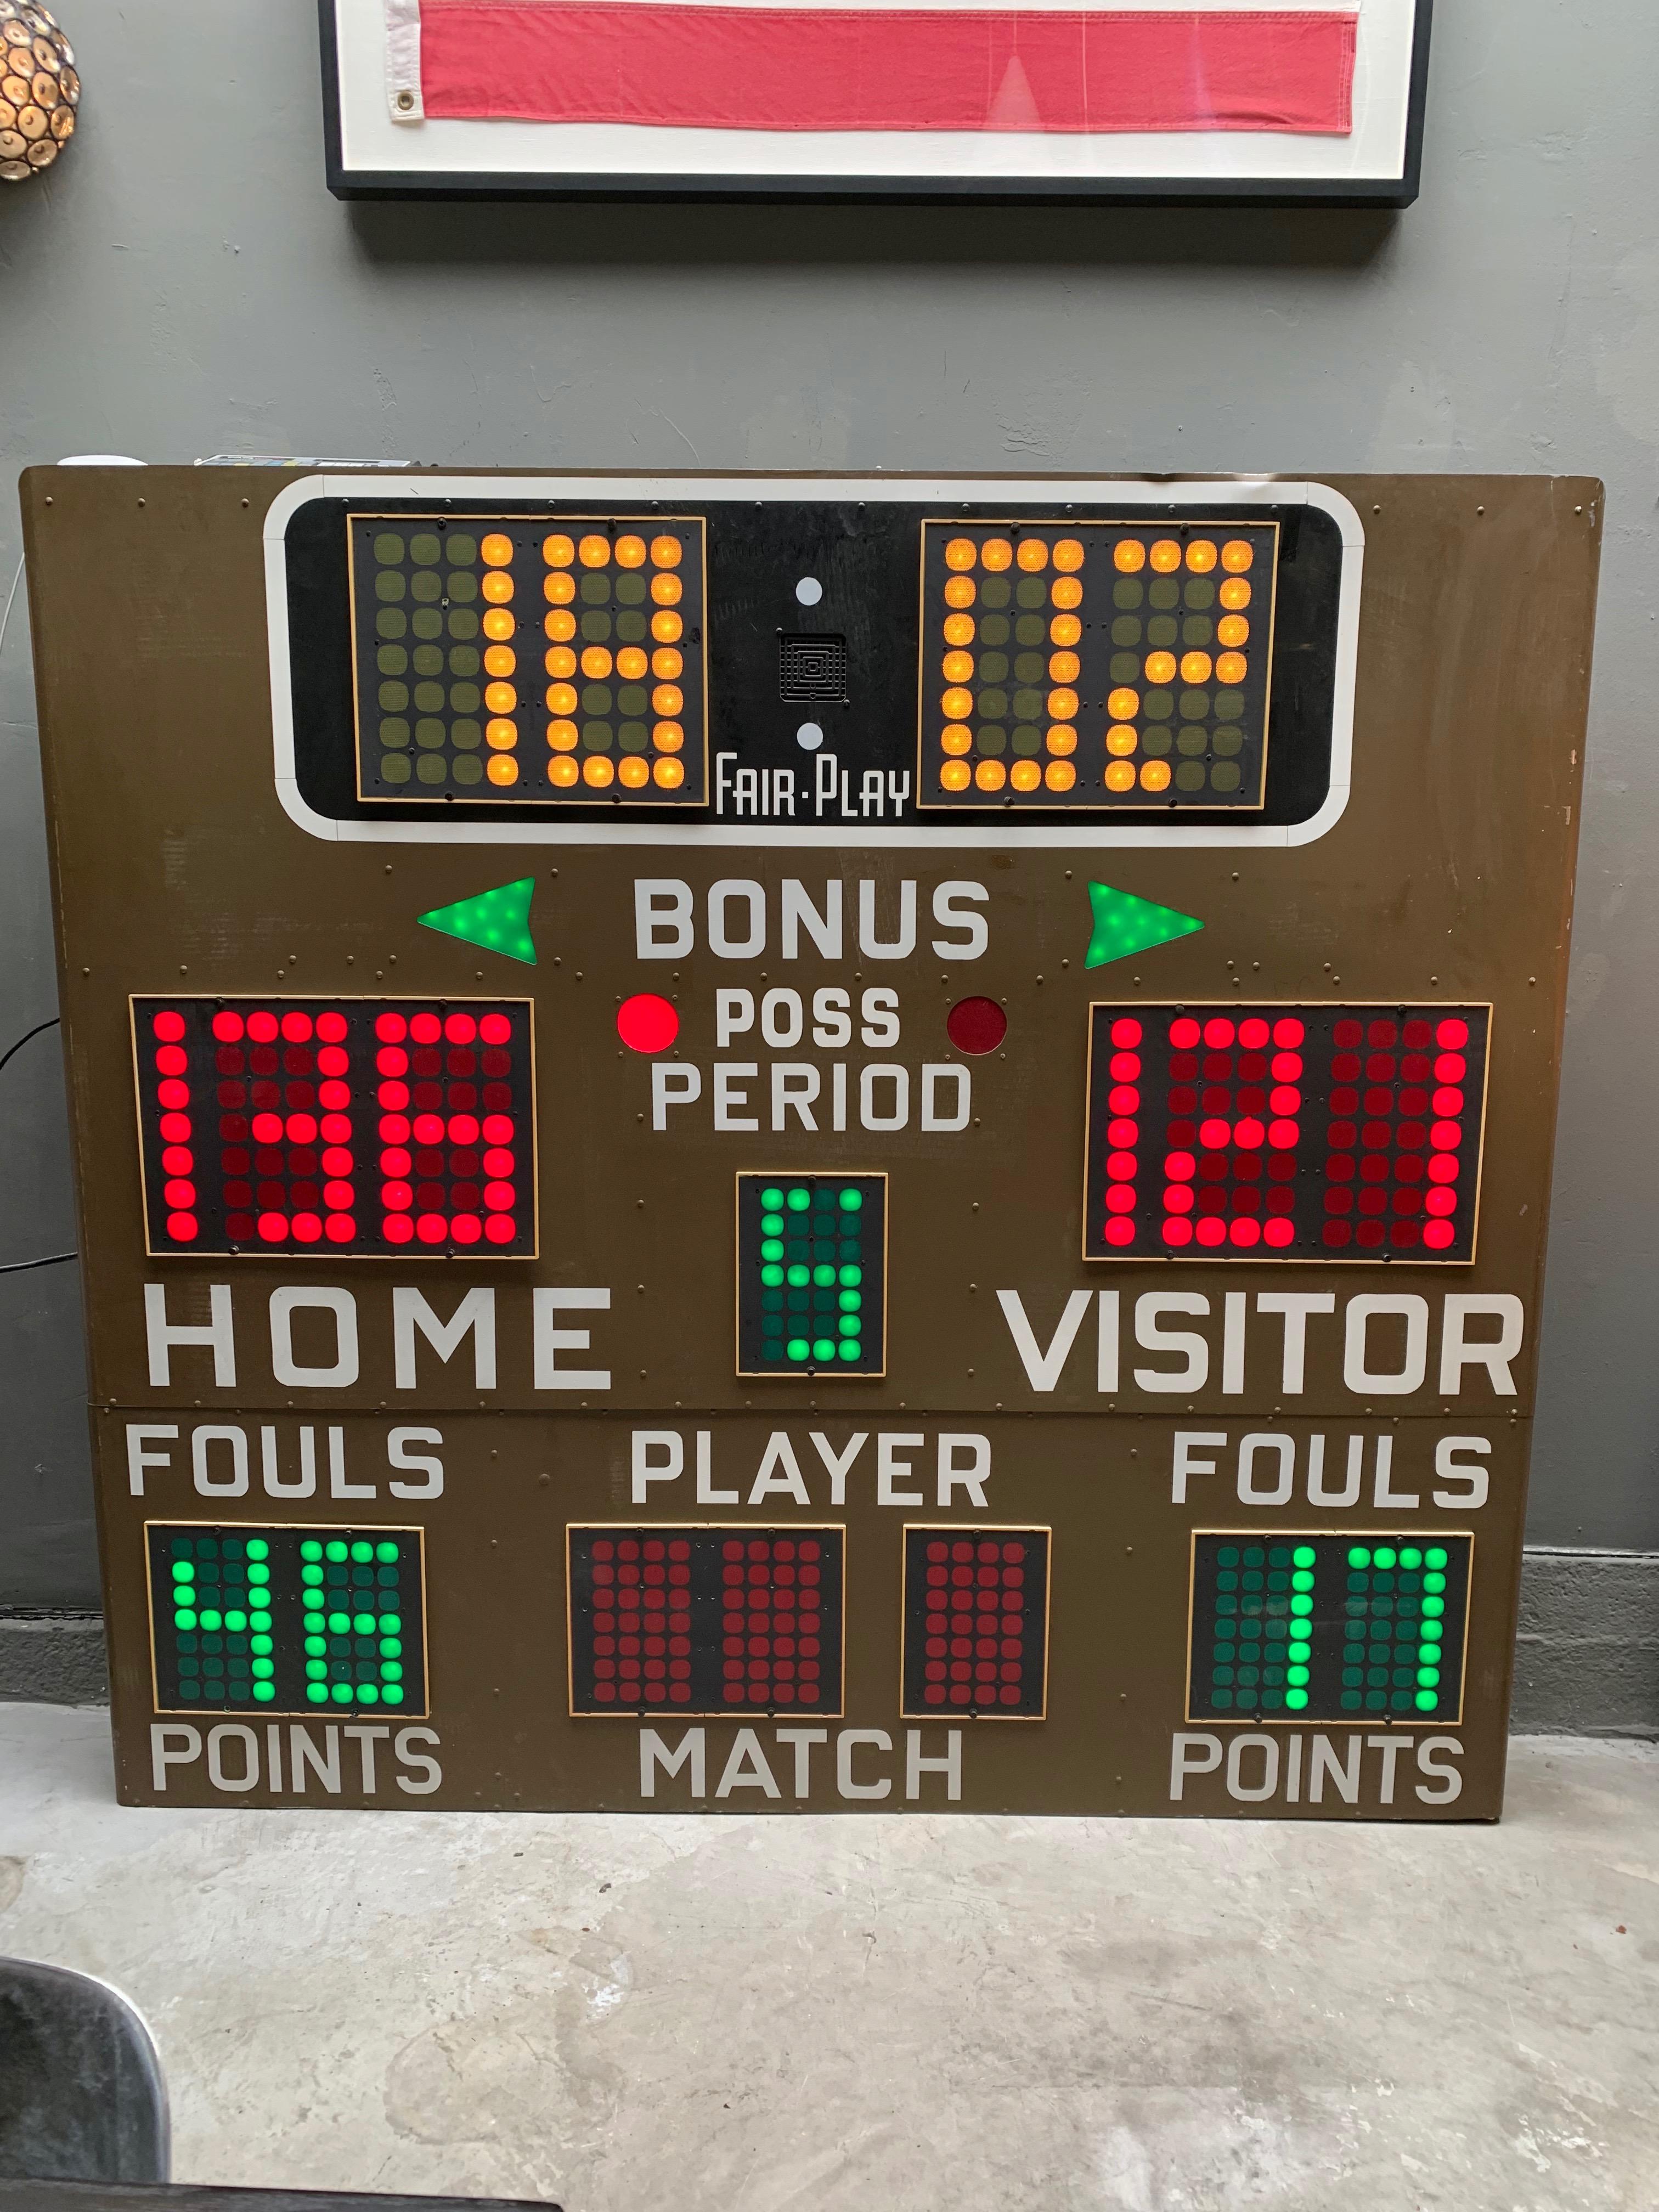 Massive vintage basketball scoreboard by Fair Play in the 1970s. In perfect working order with controller to adjust score, running shot clock etc. Working Horn. Very fun piece of art for your home or commercial space. Taken down from a school